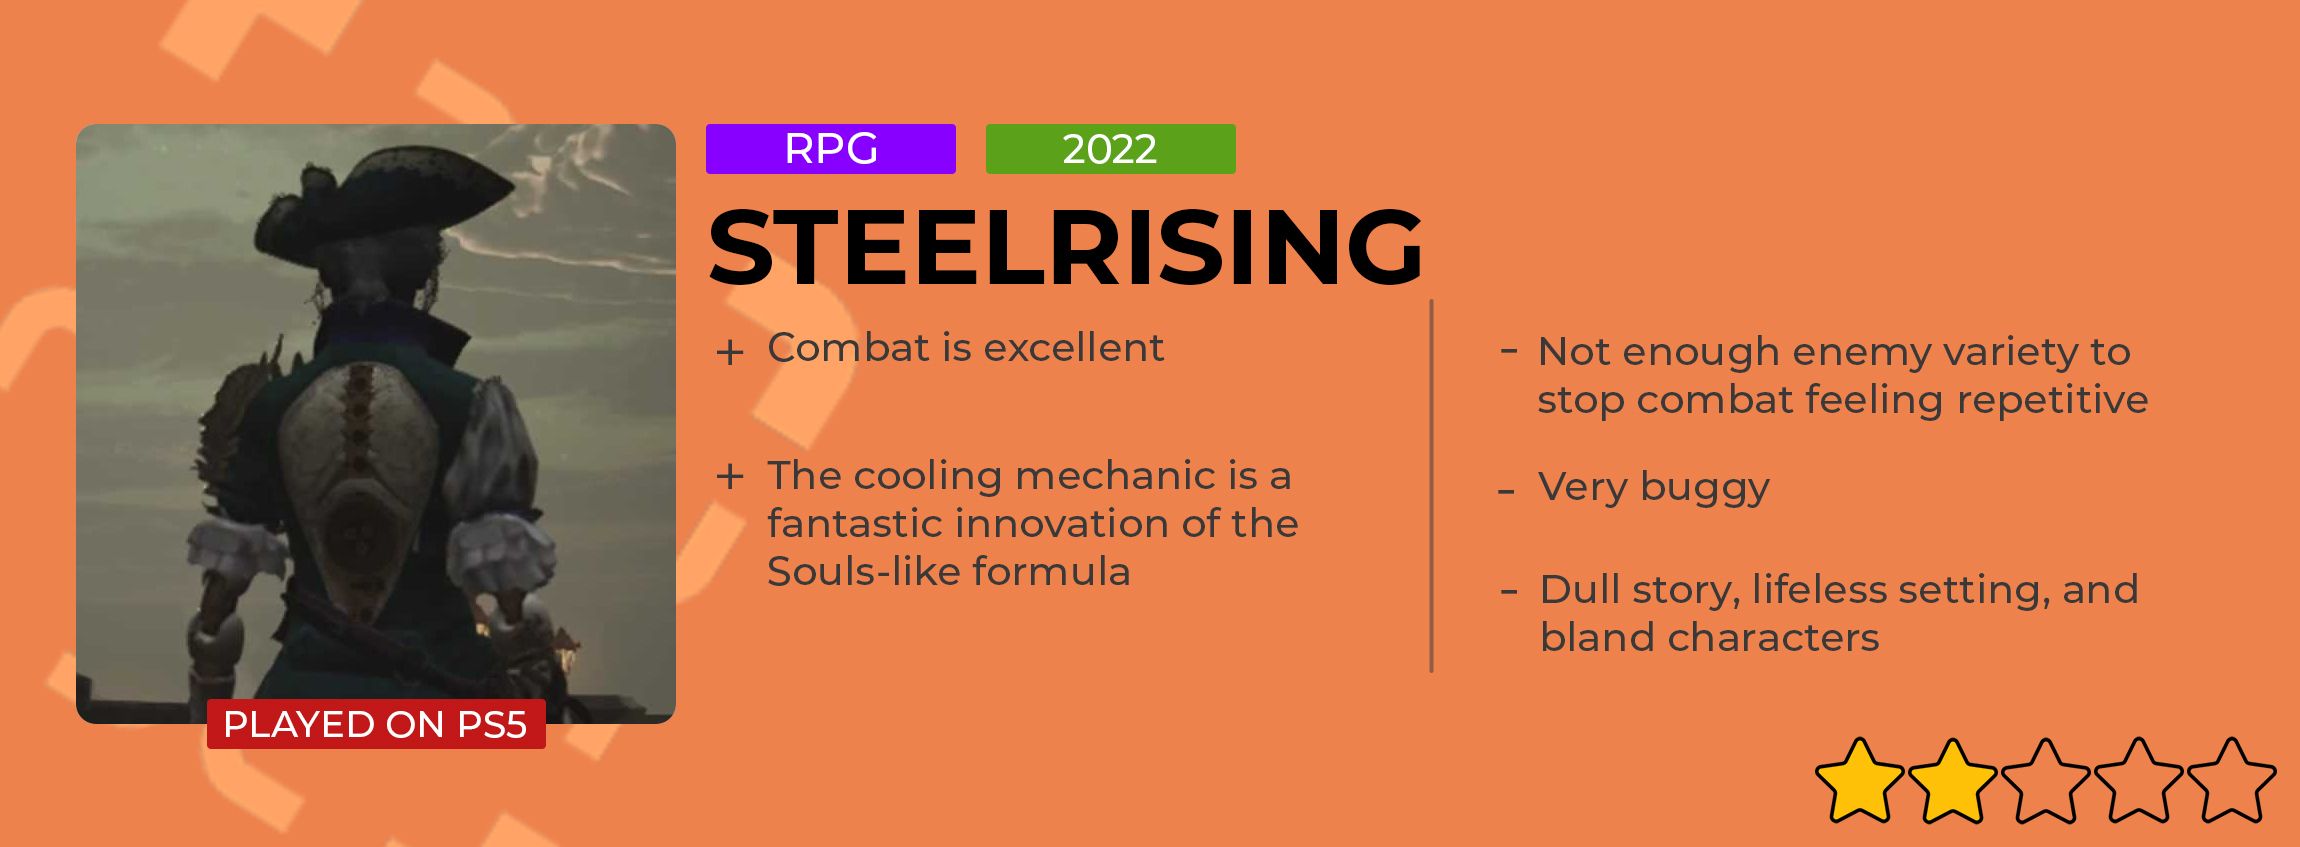 Steelrising Review Card